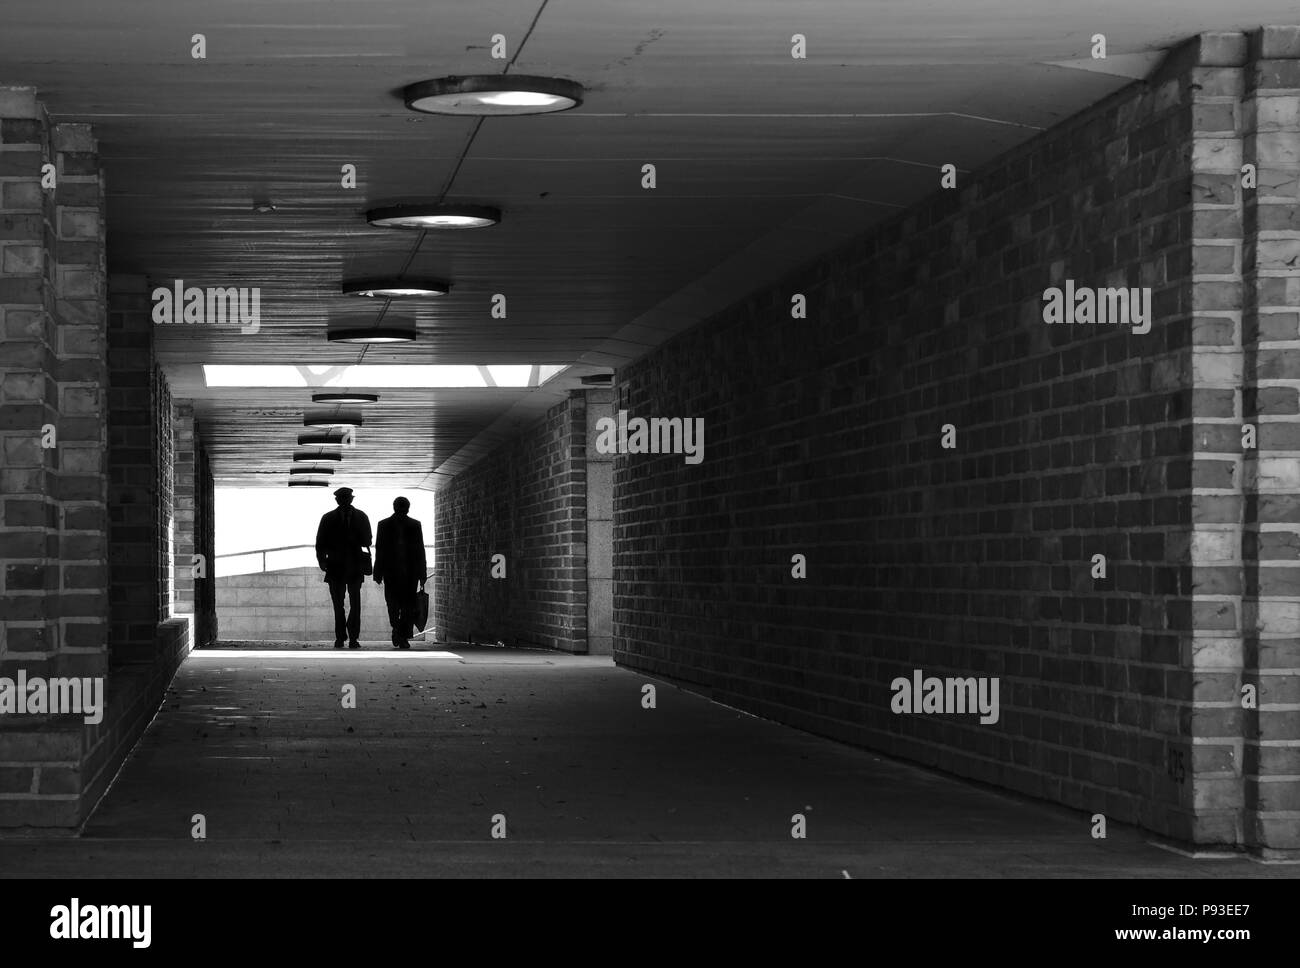 Two people silhouetted against a bright light walking through a tunnel with brick walls towards the camera (monochrome) Stock Photo